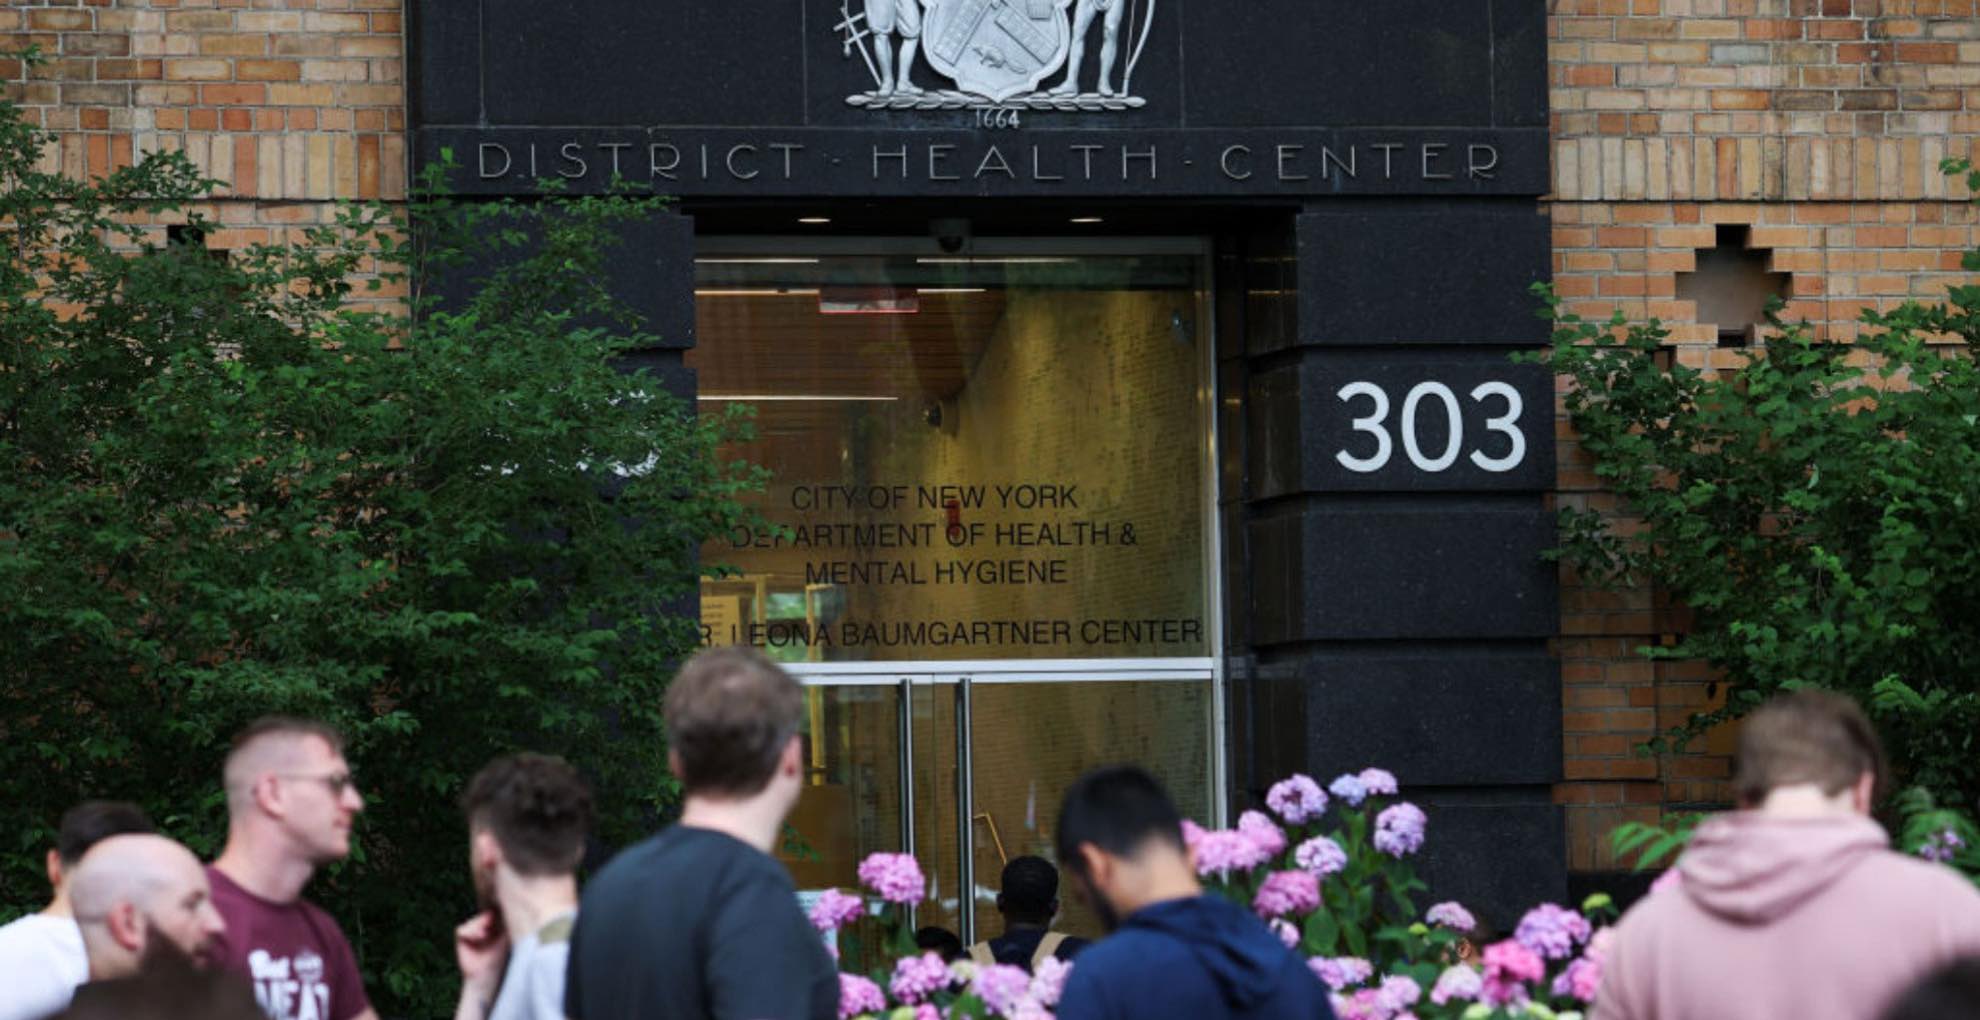 People lined up outside of Department of Health & Mental Hygiene clinic on June 23, 2022 in New York City